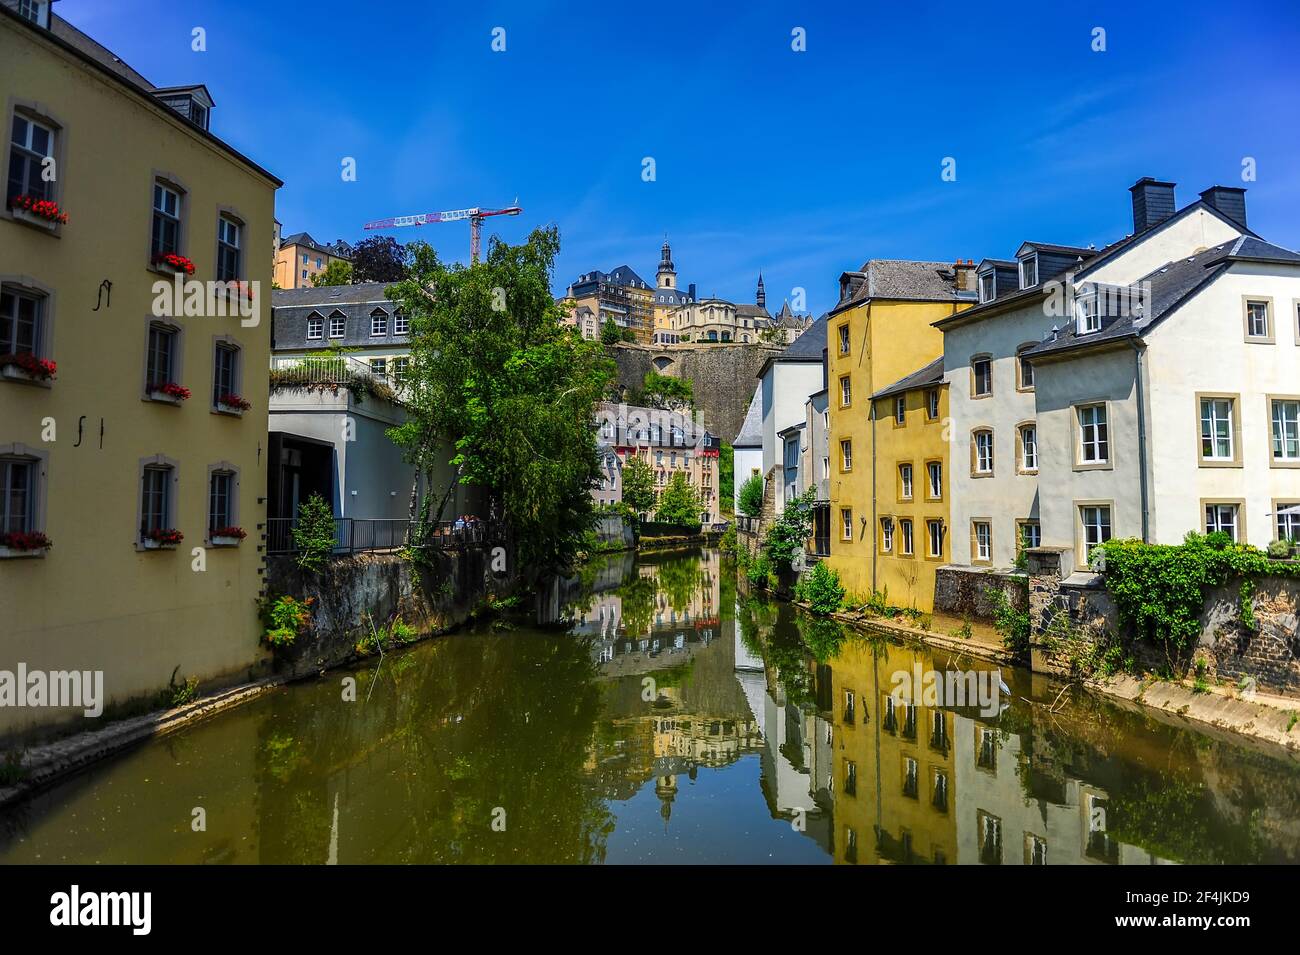 Luxembourg city, Luxembourg - July 16, 2019: Cozy old riverside houses in the old town of Luxembourg city in Luxembourg Stock Photo